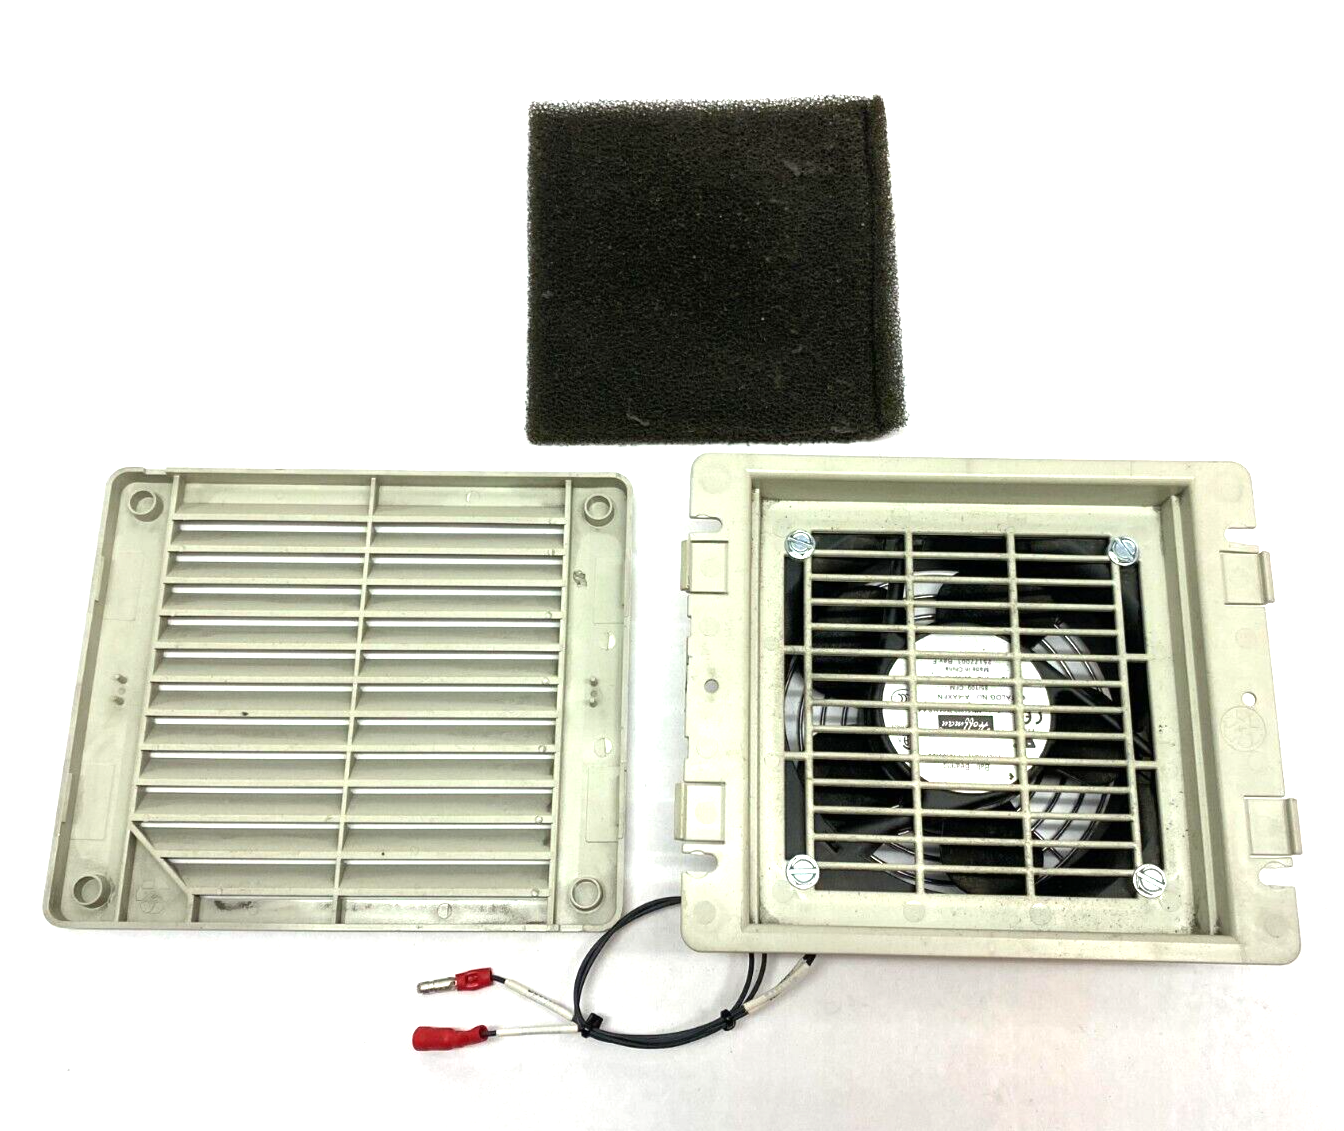 Hoffman TFP41 Side Mount Vented Filter Fan Assembly for Electrical Enclosure